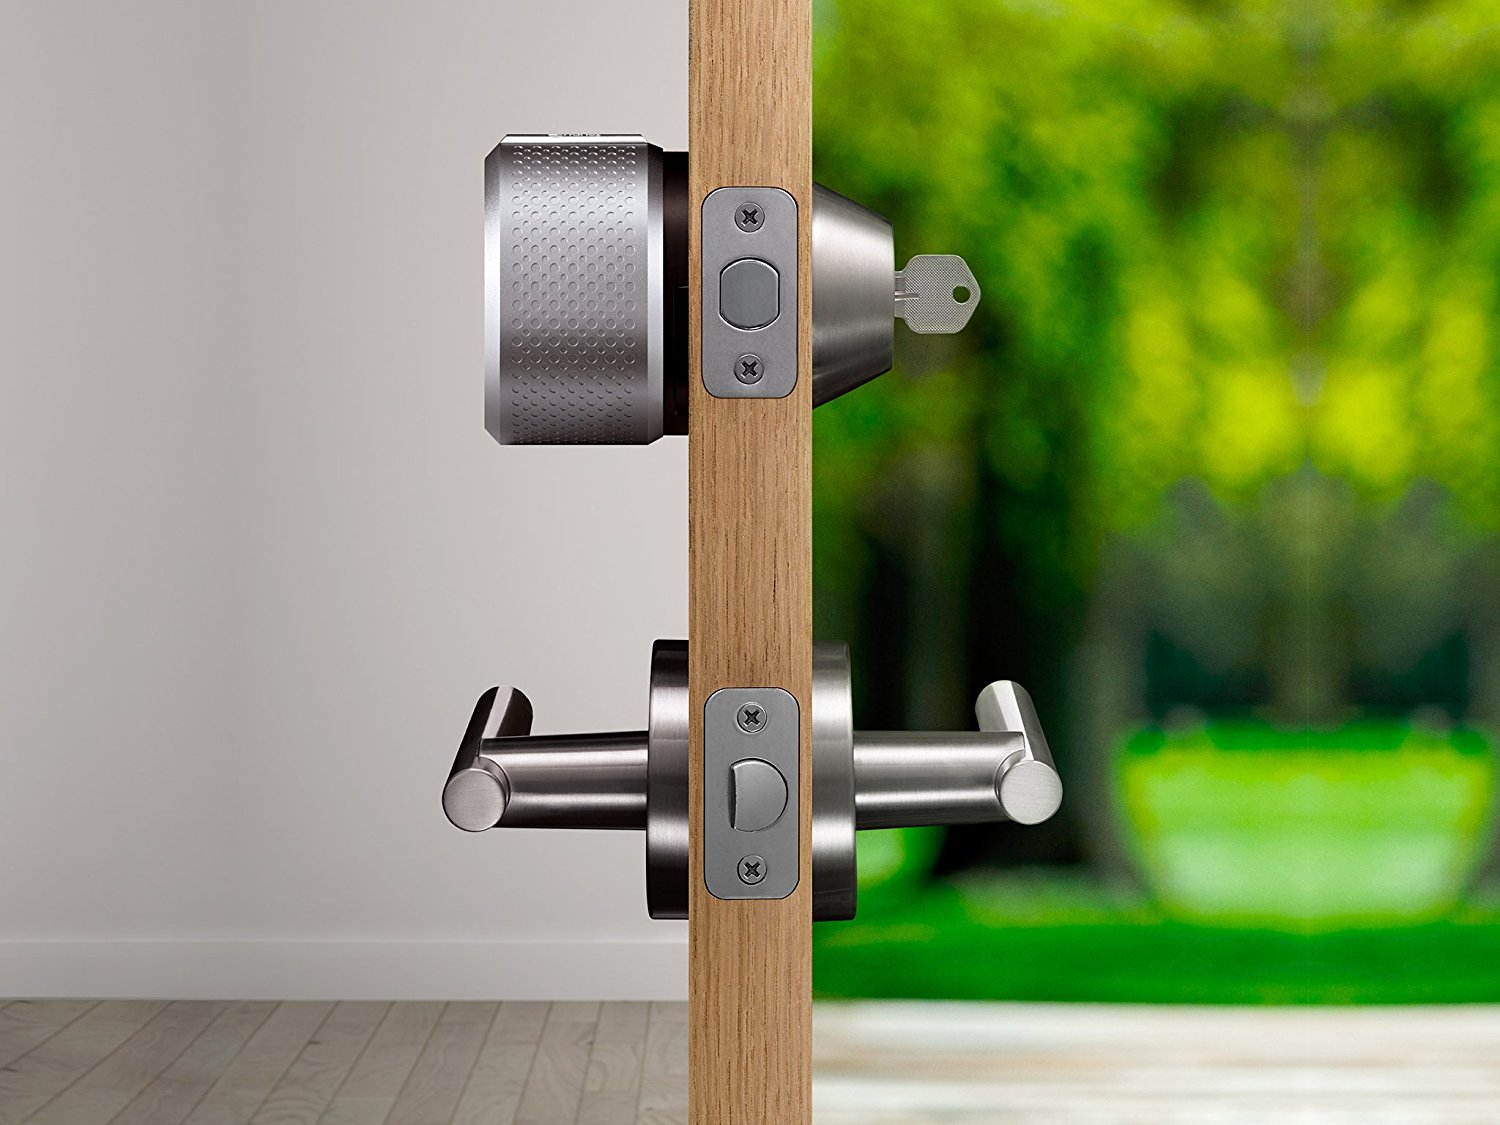 Amazon to sell smart locks so it can slip packages into your home